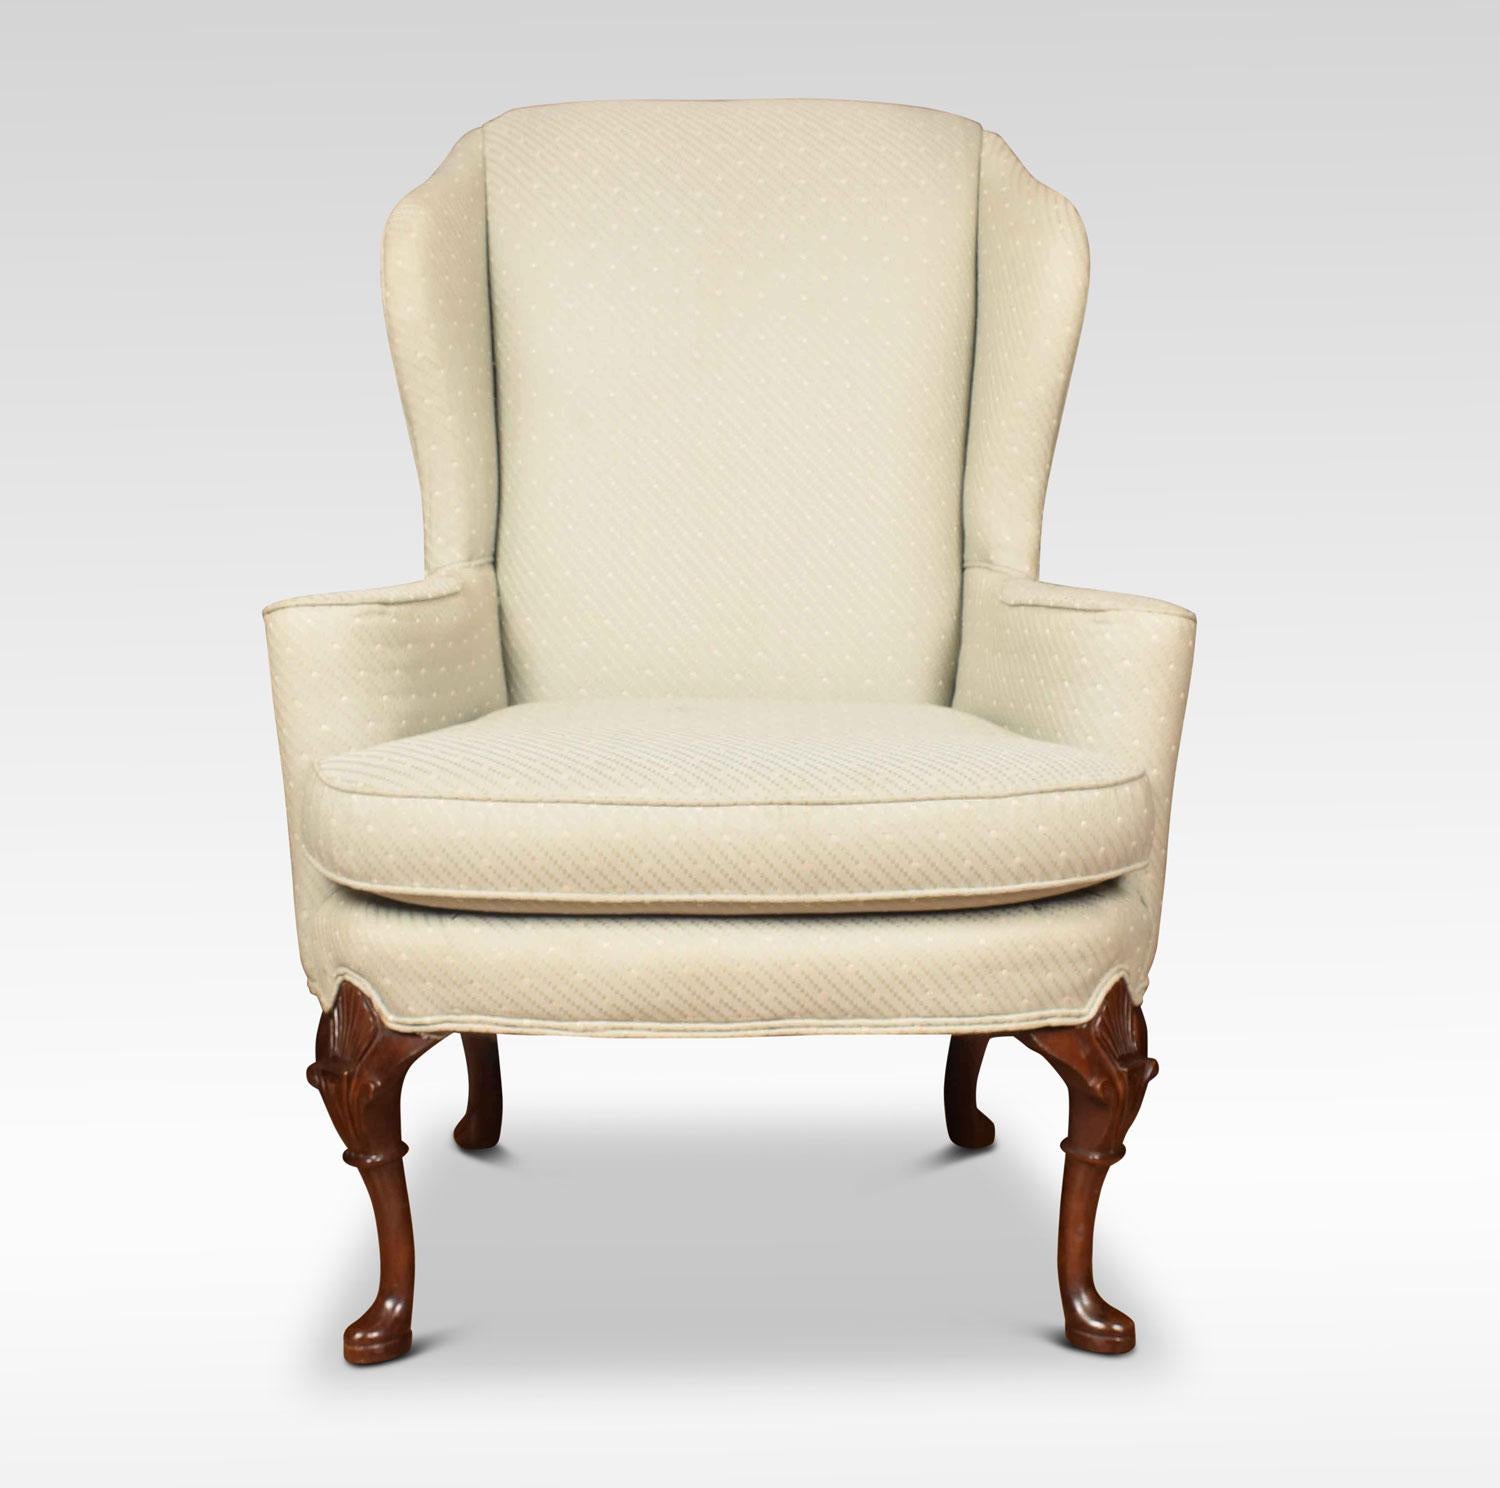 A pair of large Georgian style armchairs, the winged backs and out swept arms upholstered in a light green fabric. Raised up on slender cabriole legs terminating in pad feet.
Dimensions:
Height 43 inches height to seat 20 inches
Width 32